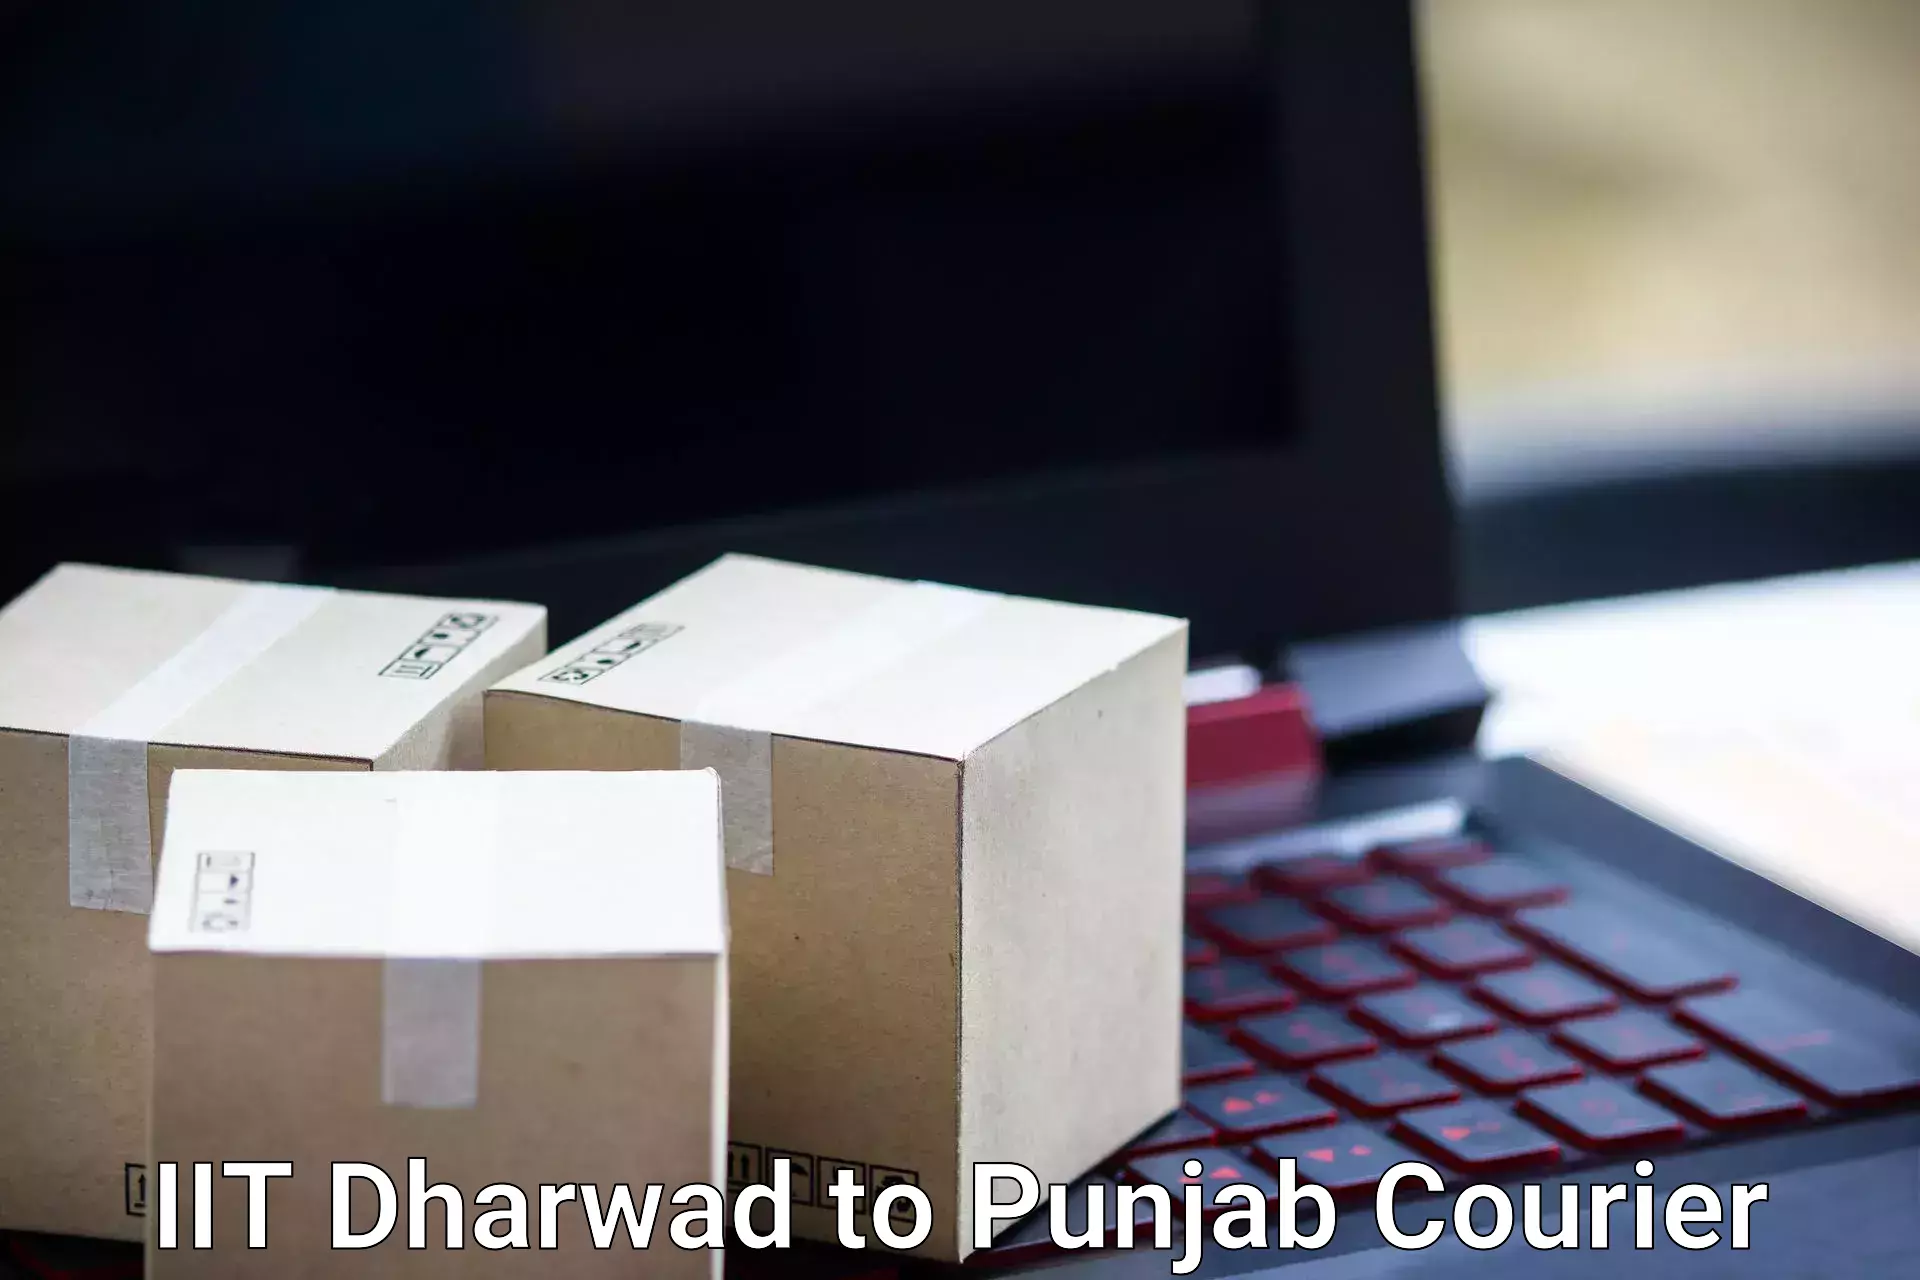 Baggage shipping service IIT Dharwad to Mohali